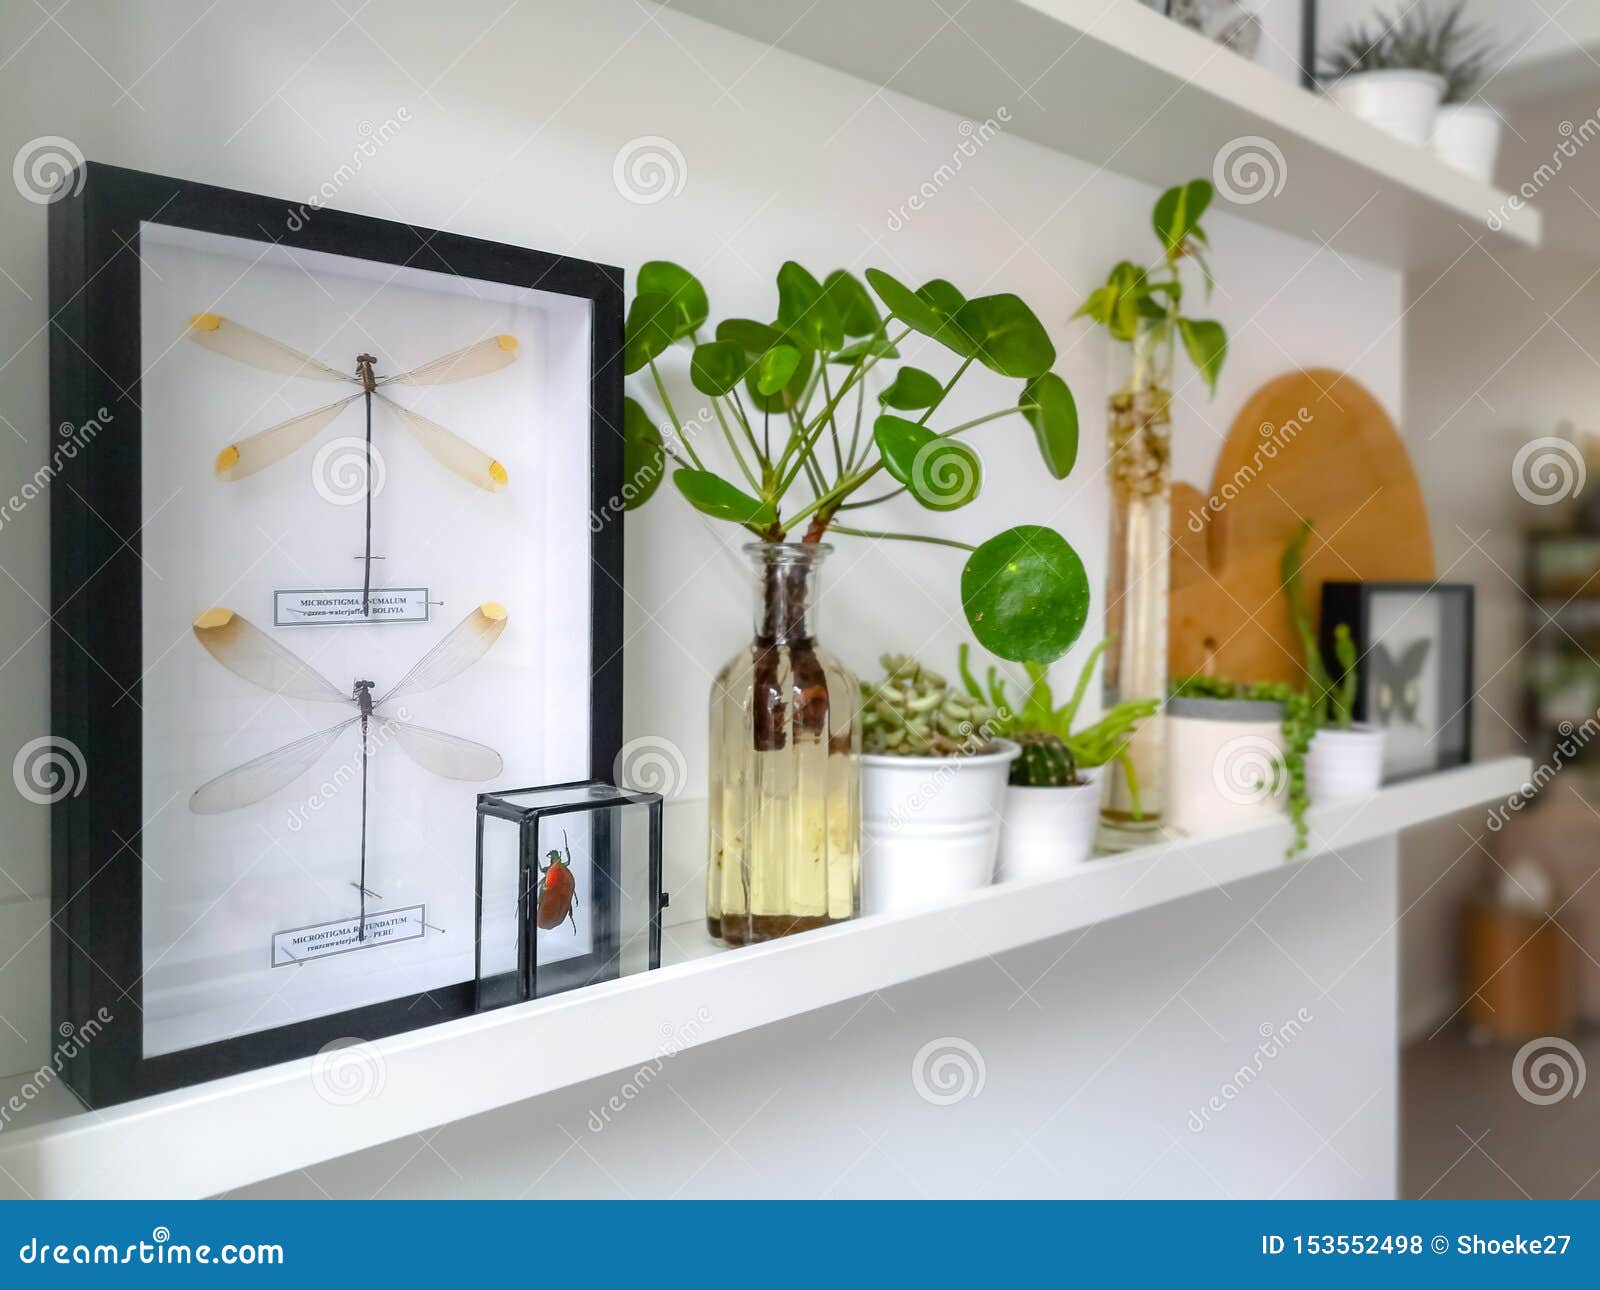 white hanging shelves with multiple plants and framed taxidermy insect art such as butterflies in a black and white interior